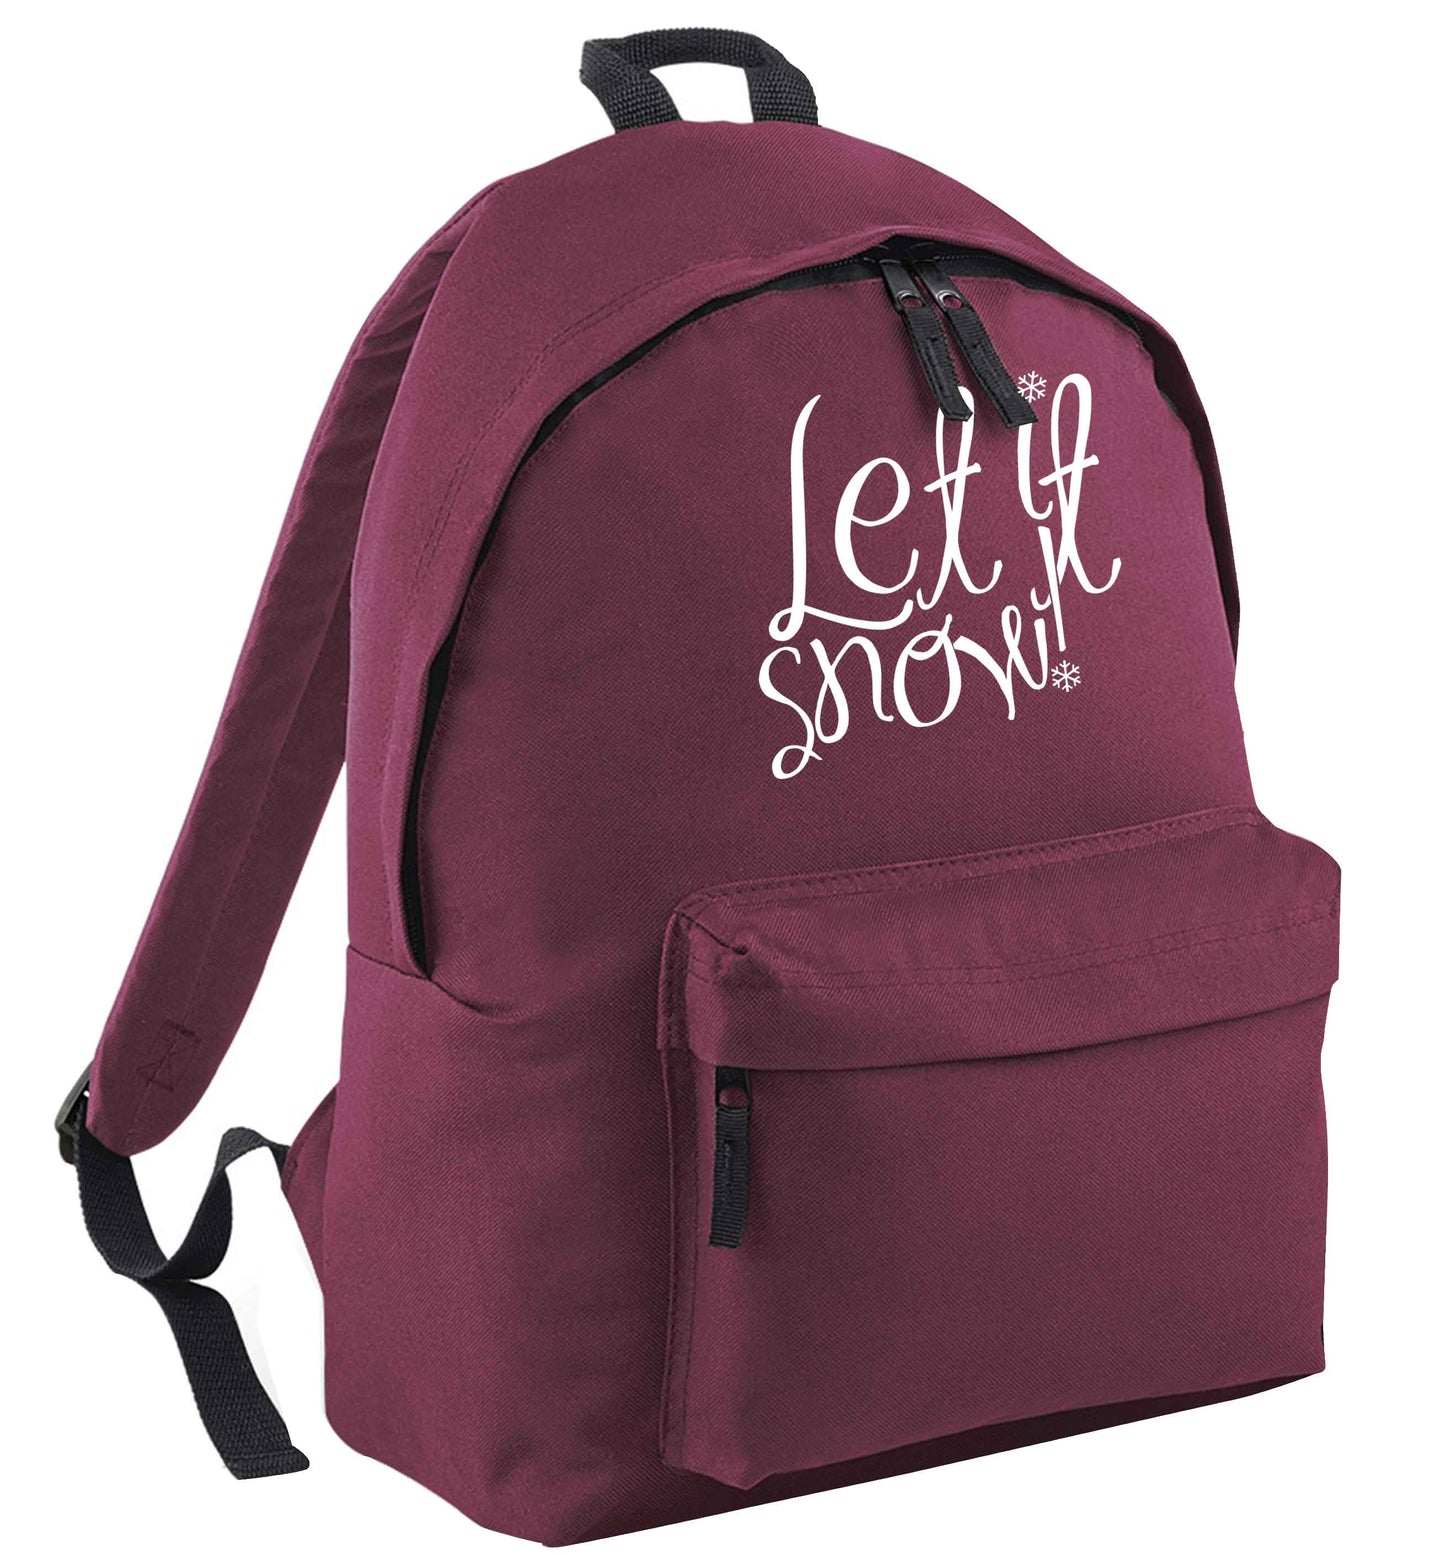 Let it snow maroon adults backpack